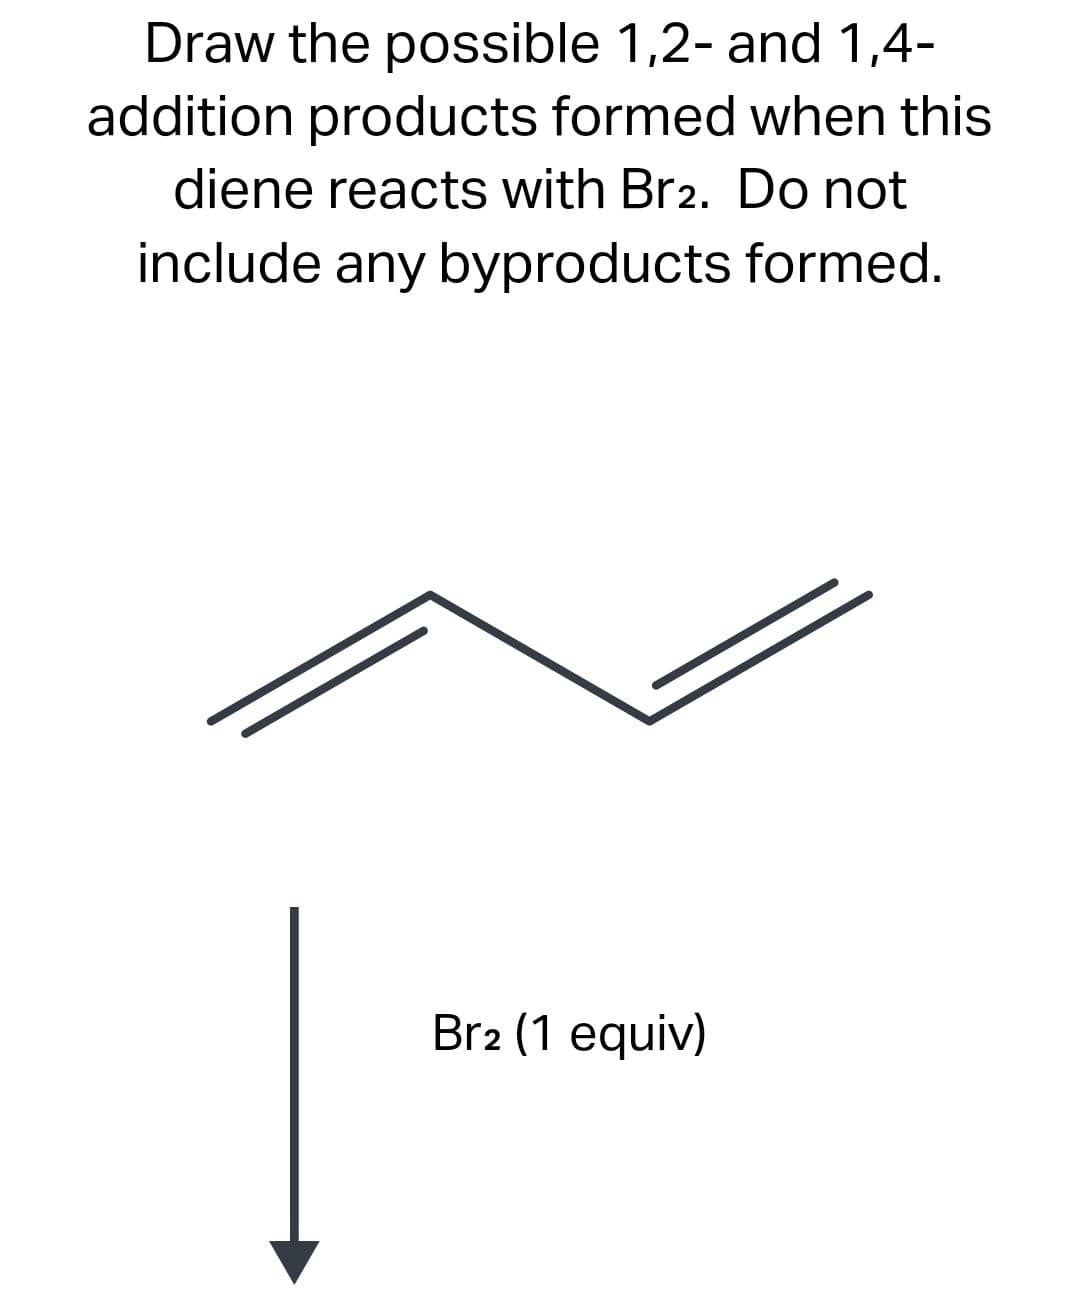 Draw the possible 1,2- and 1,4-
addition products formed when this
diene reacts with Br2. Do not
include any byproducts formed.
Br2 (1 equiv)